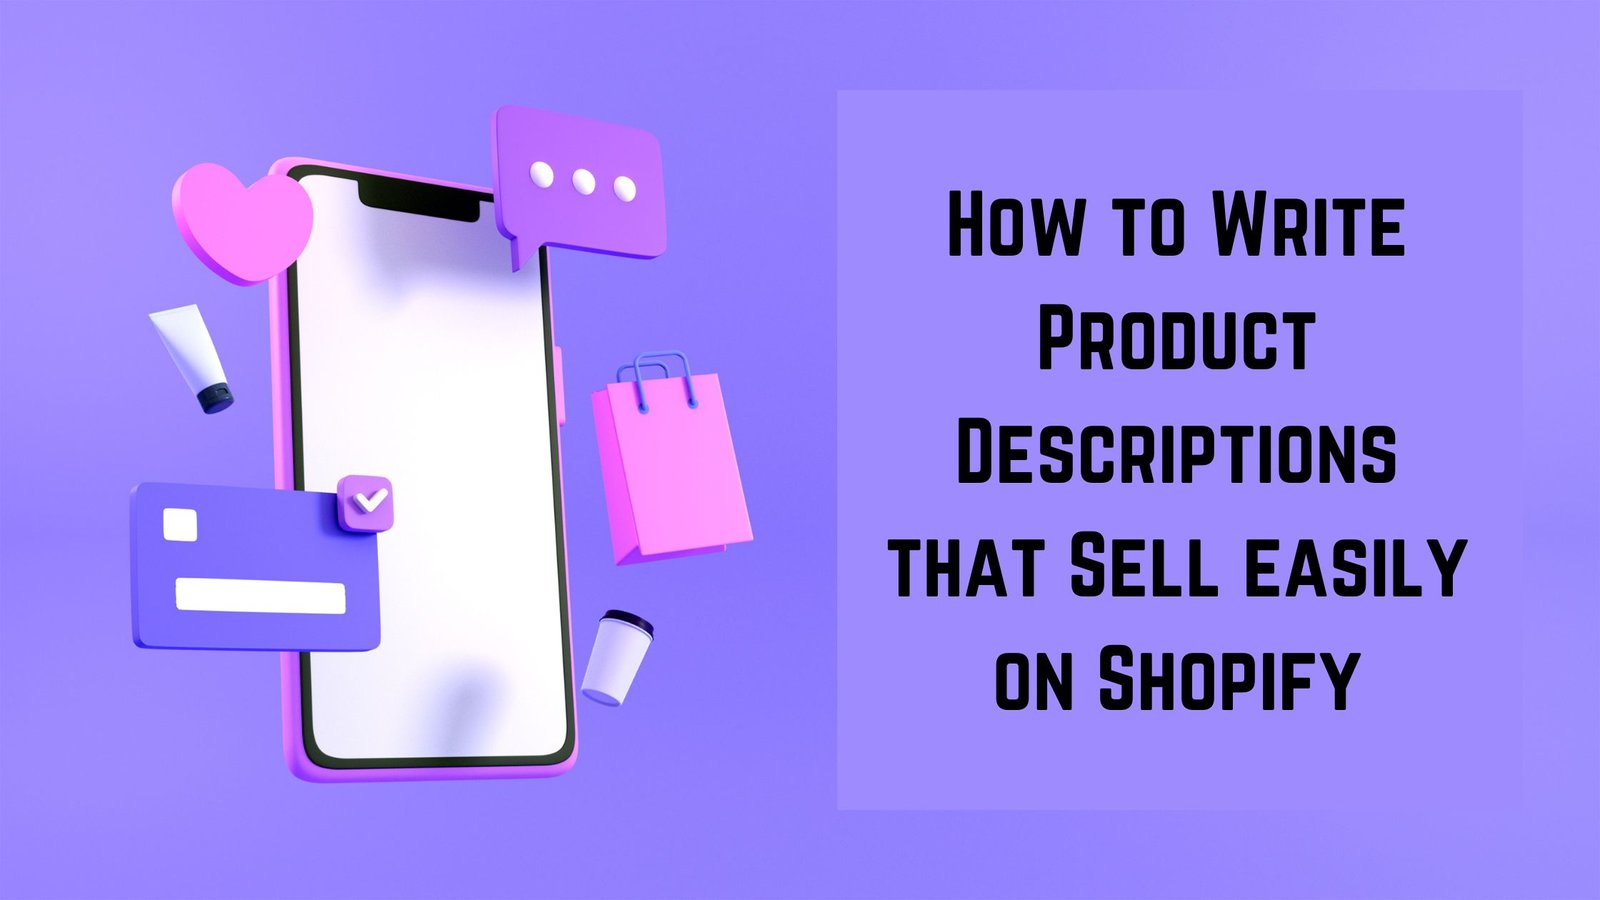 How To Write Product Descriptions That Sell Easily On Shopify